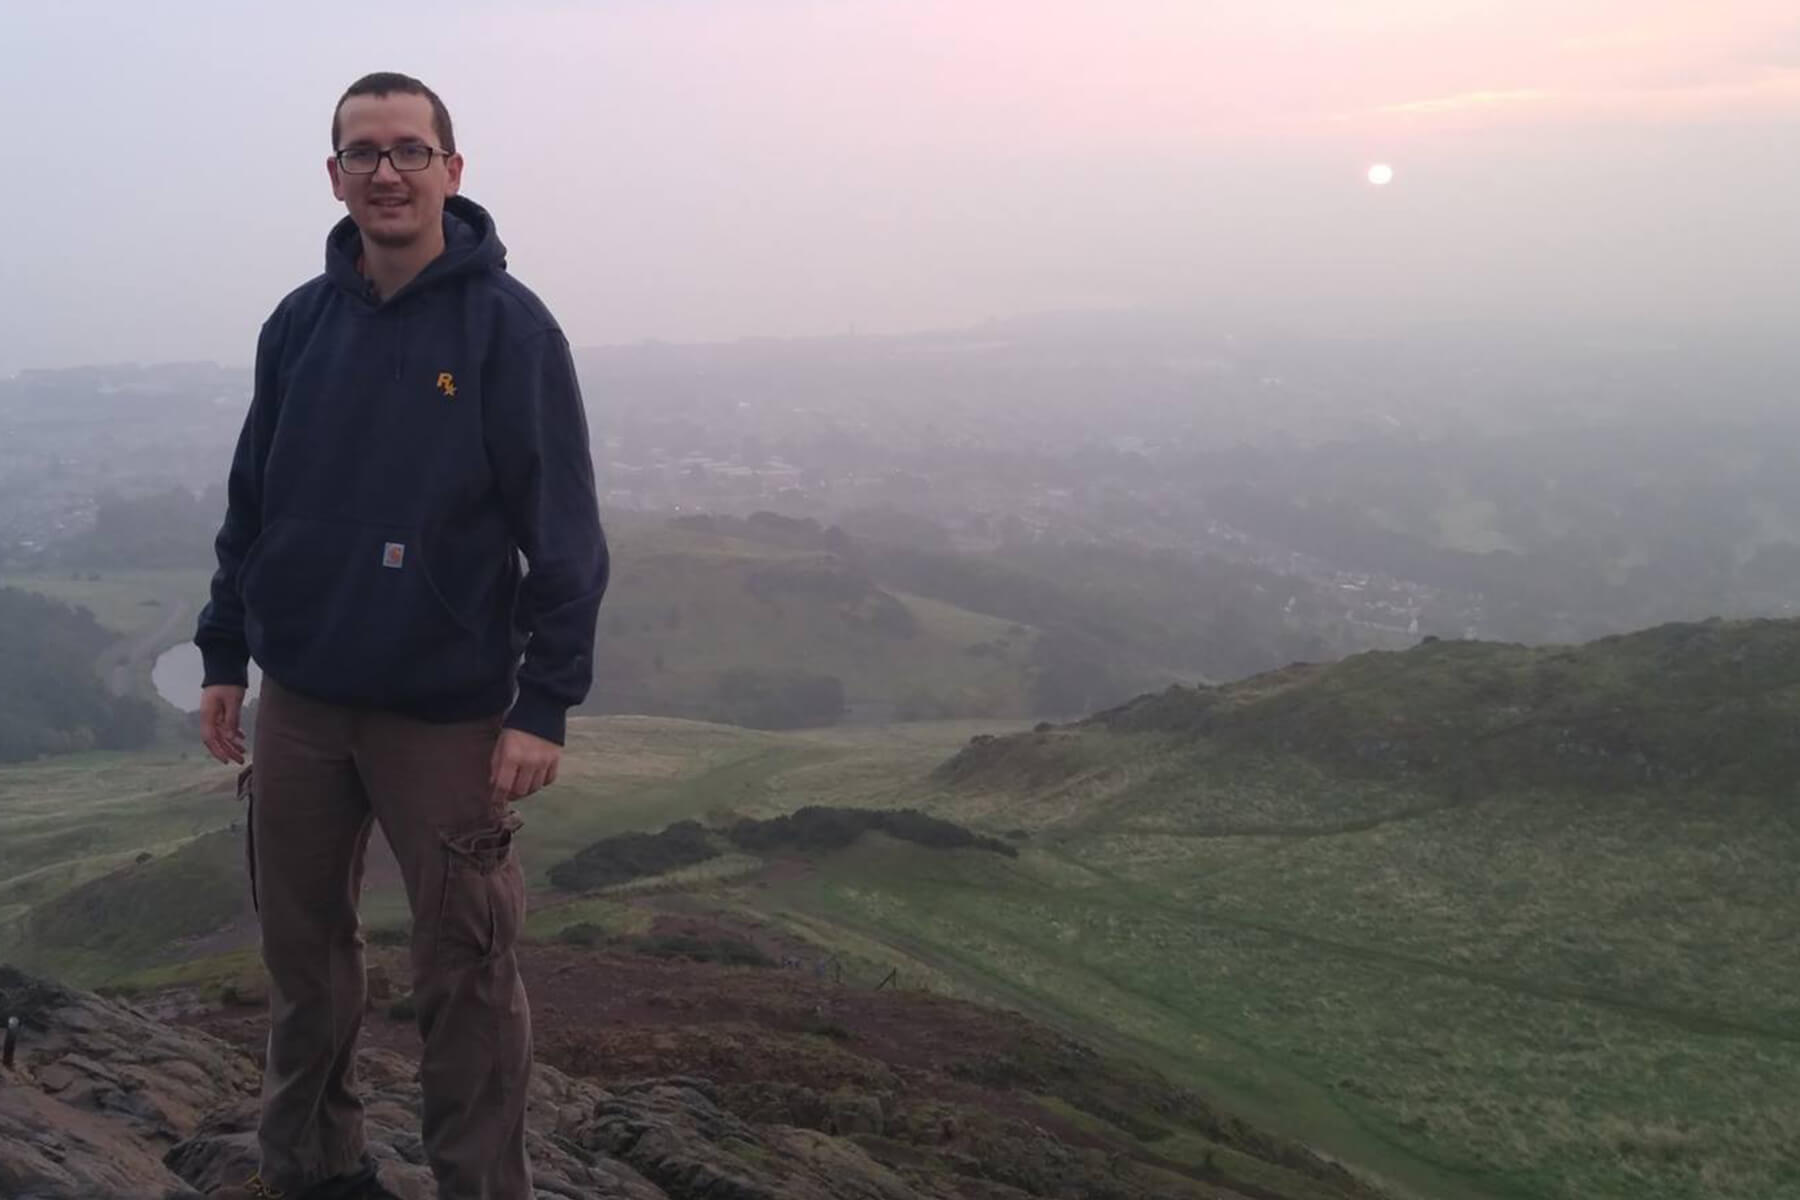 Andy Kibler poses at Arthur's Seat in Scotland